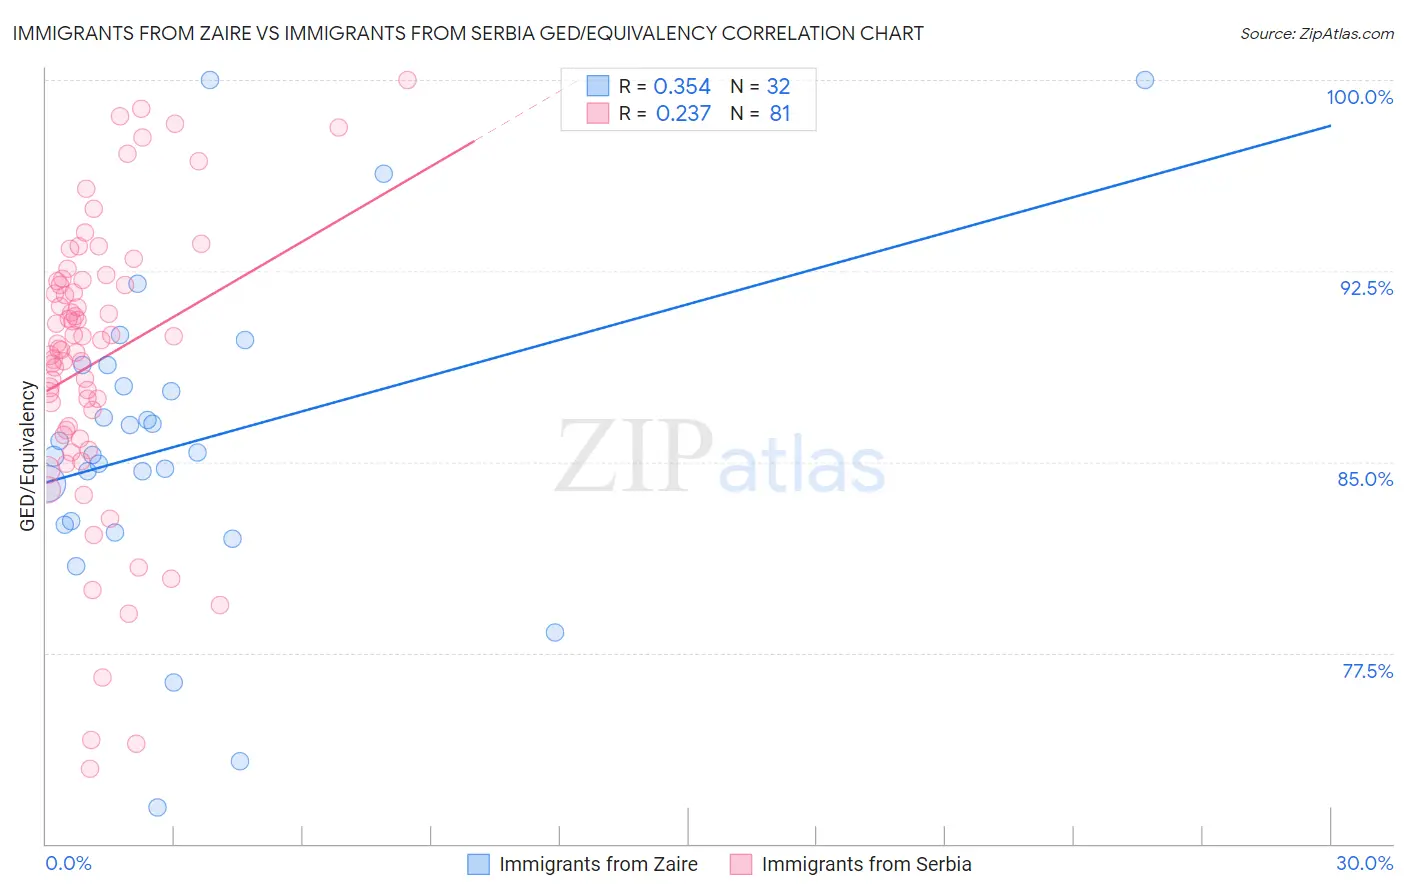 Immigrants from Zaire vs Immigrants from Serbia GED/Equivalency